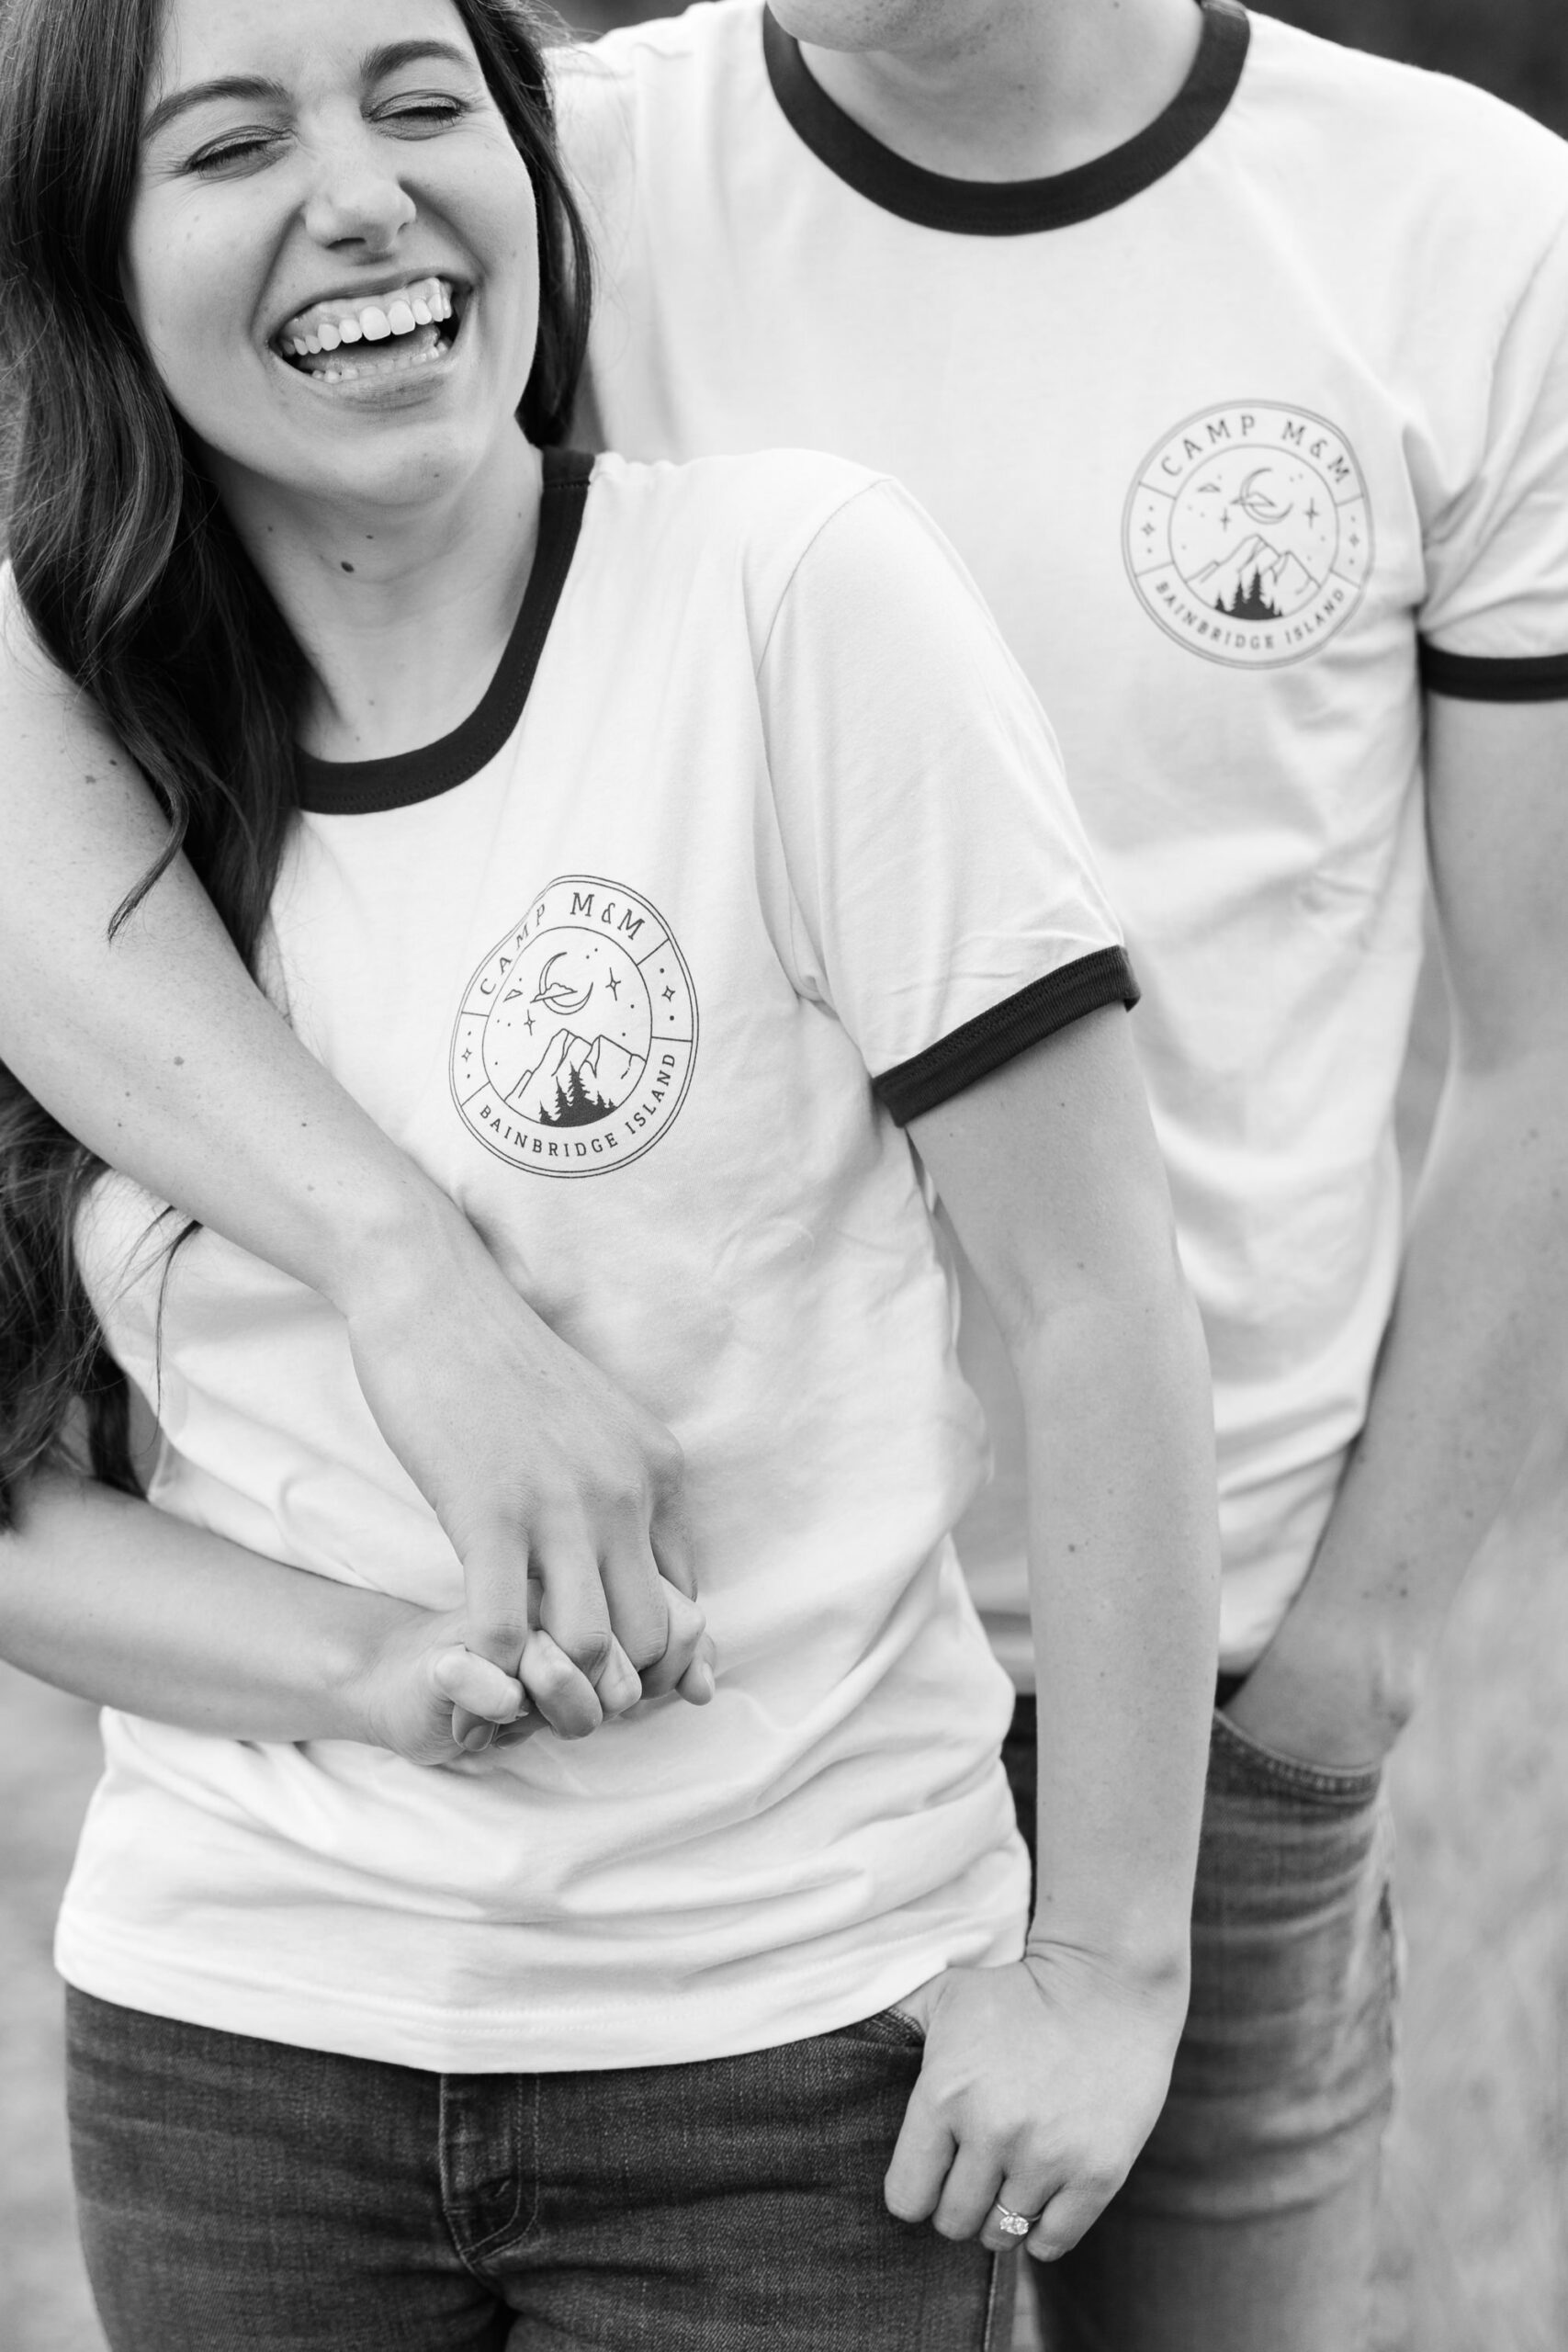 A black and white photo of a couple laughing and holding hands in matching "Camp M&M" shirts.